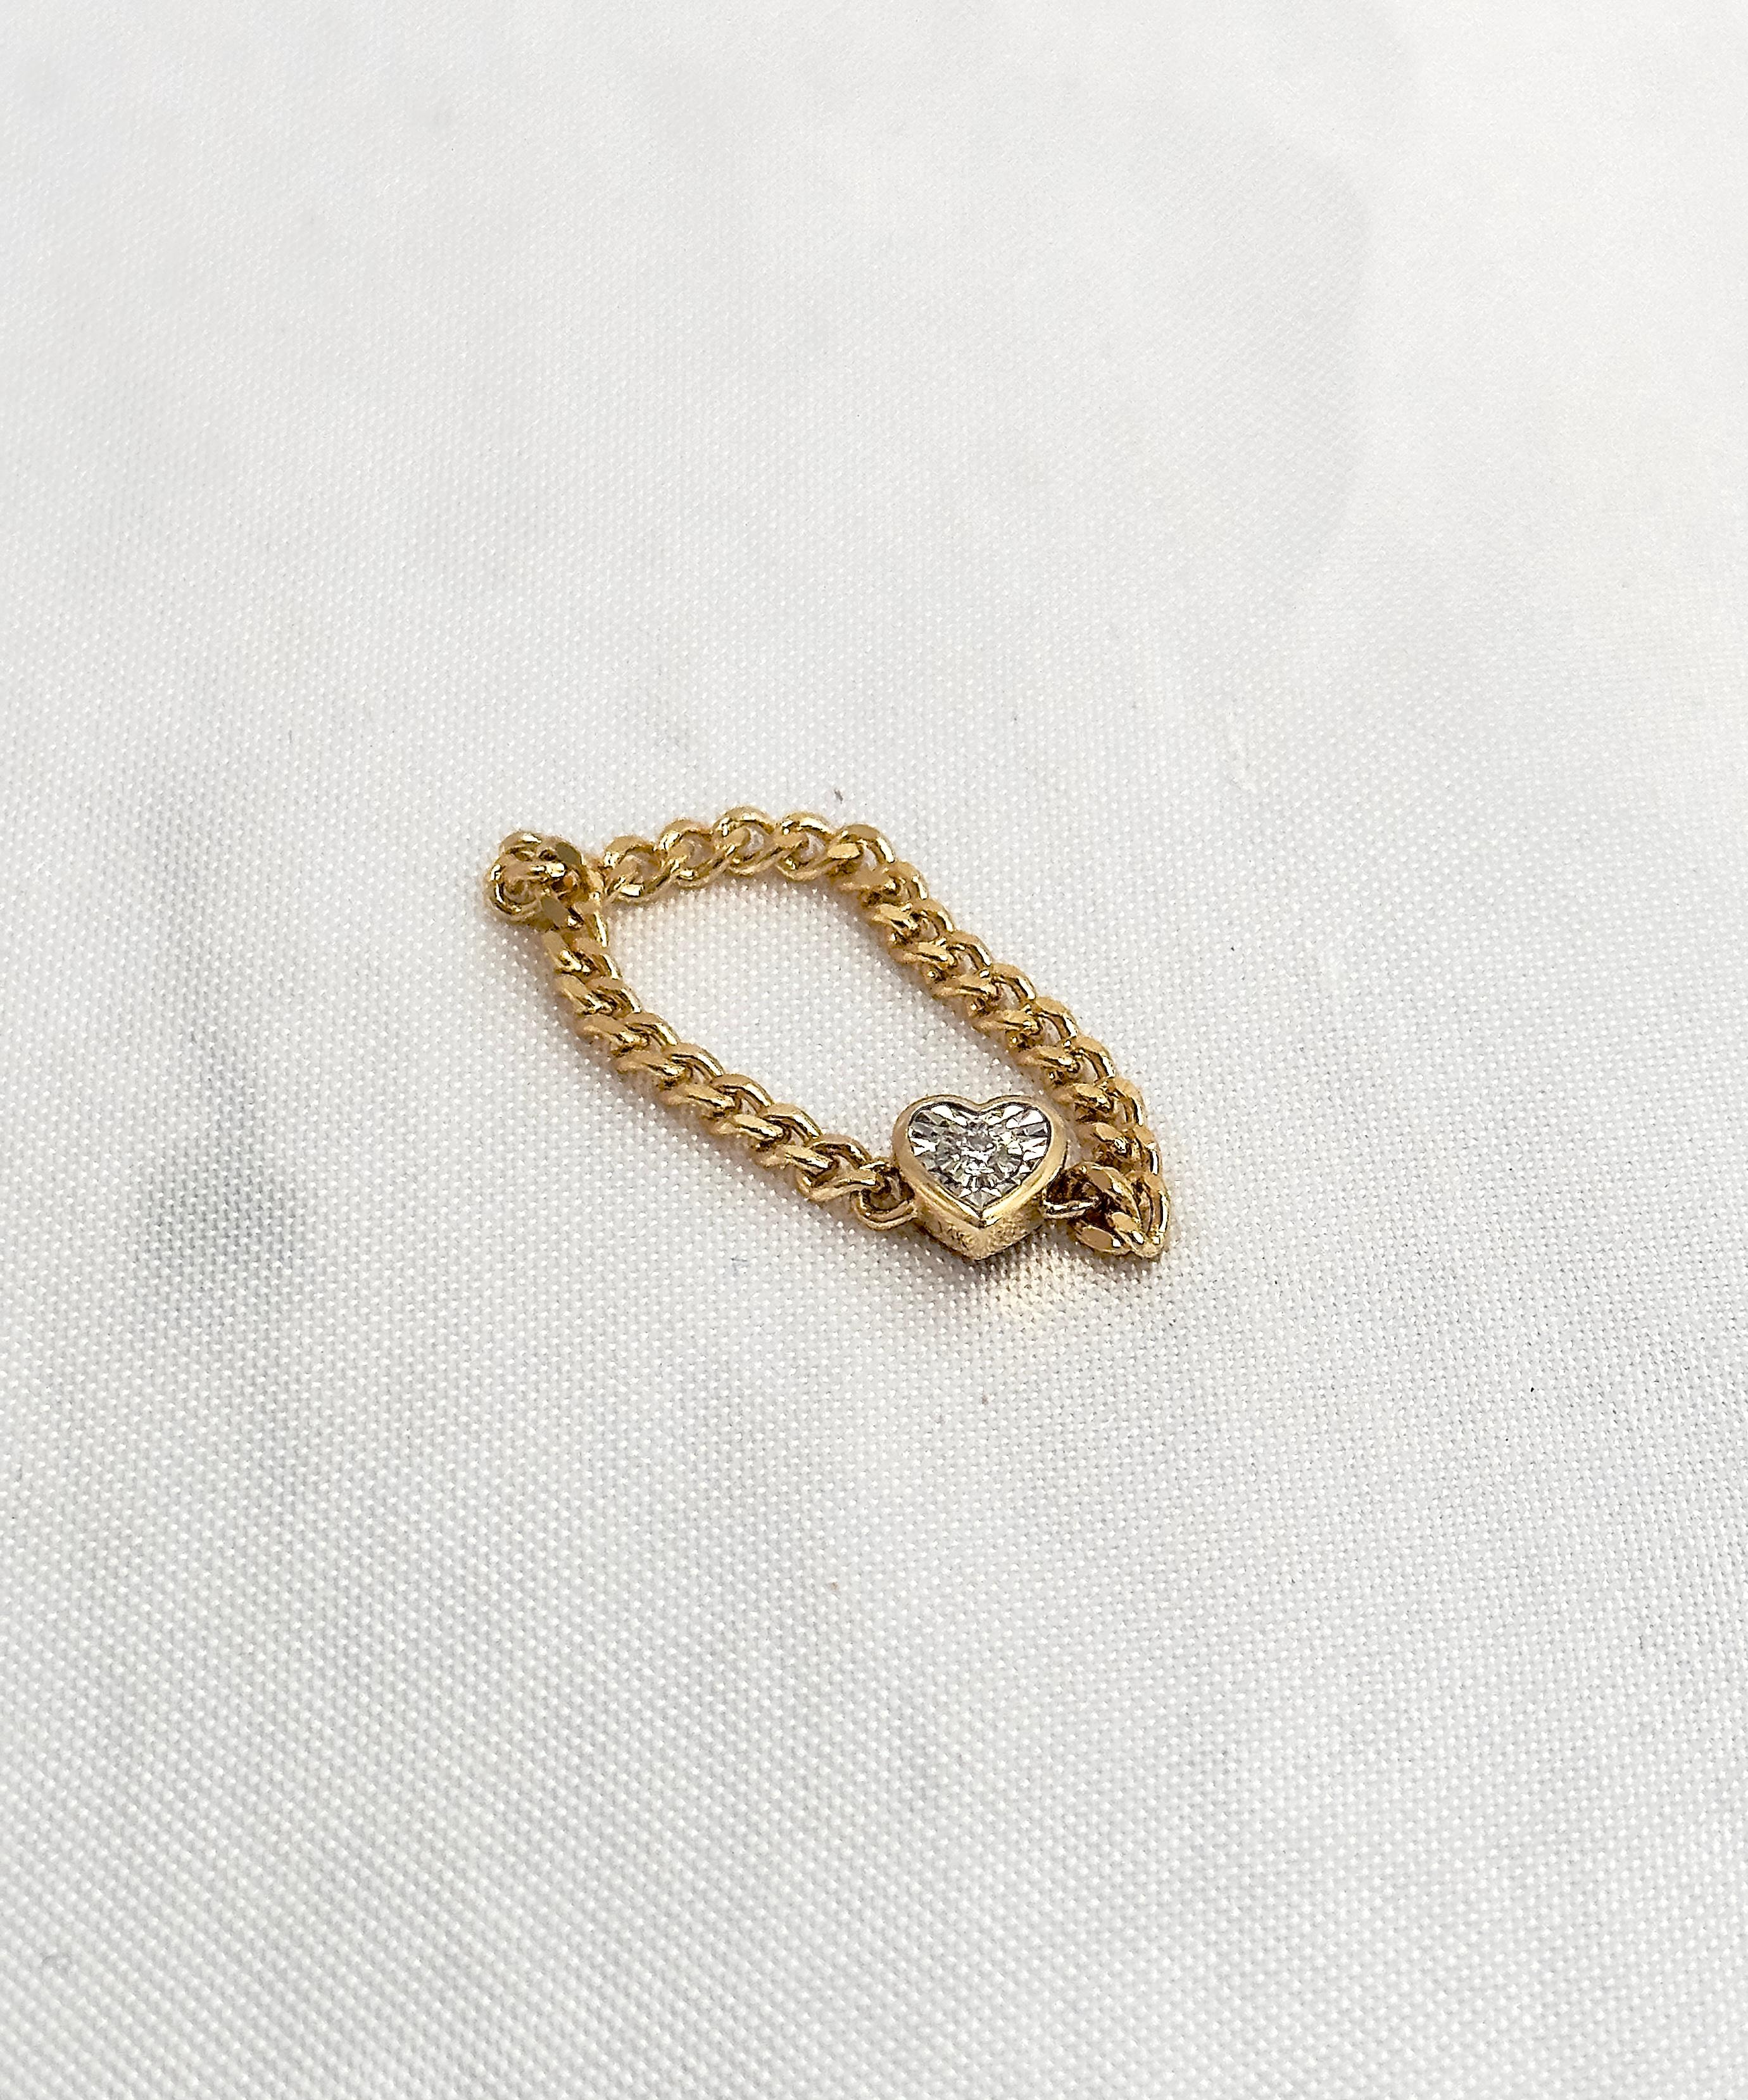 Women's or Men's Diamond Chain Ring, Solid Gold Chain Ring, Stackable Chain Ring, Natural Diamond For Sale